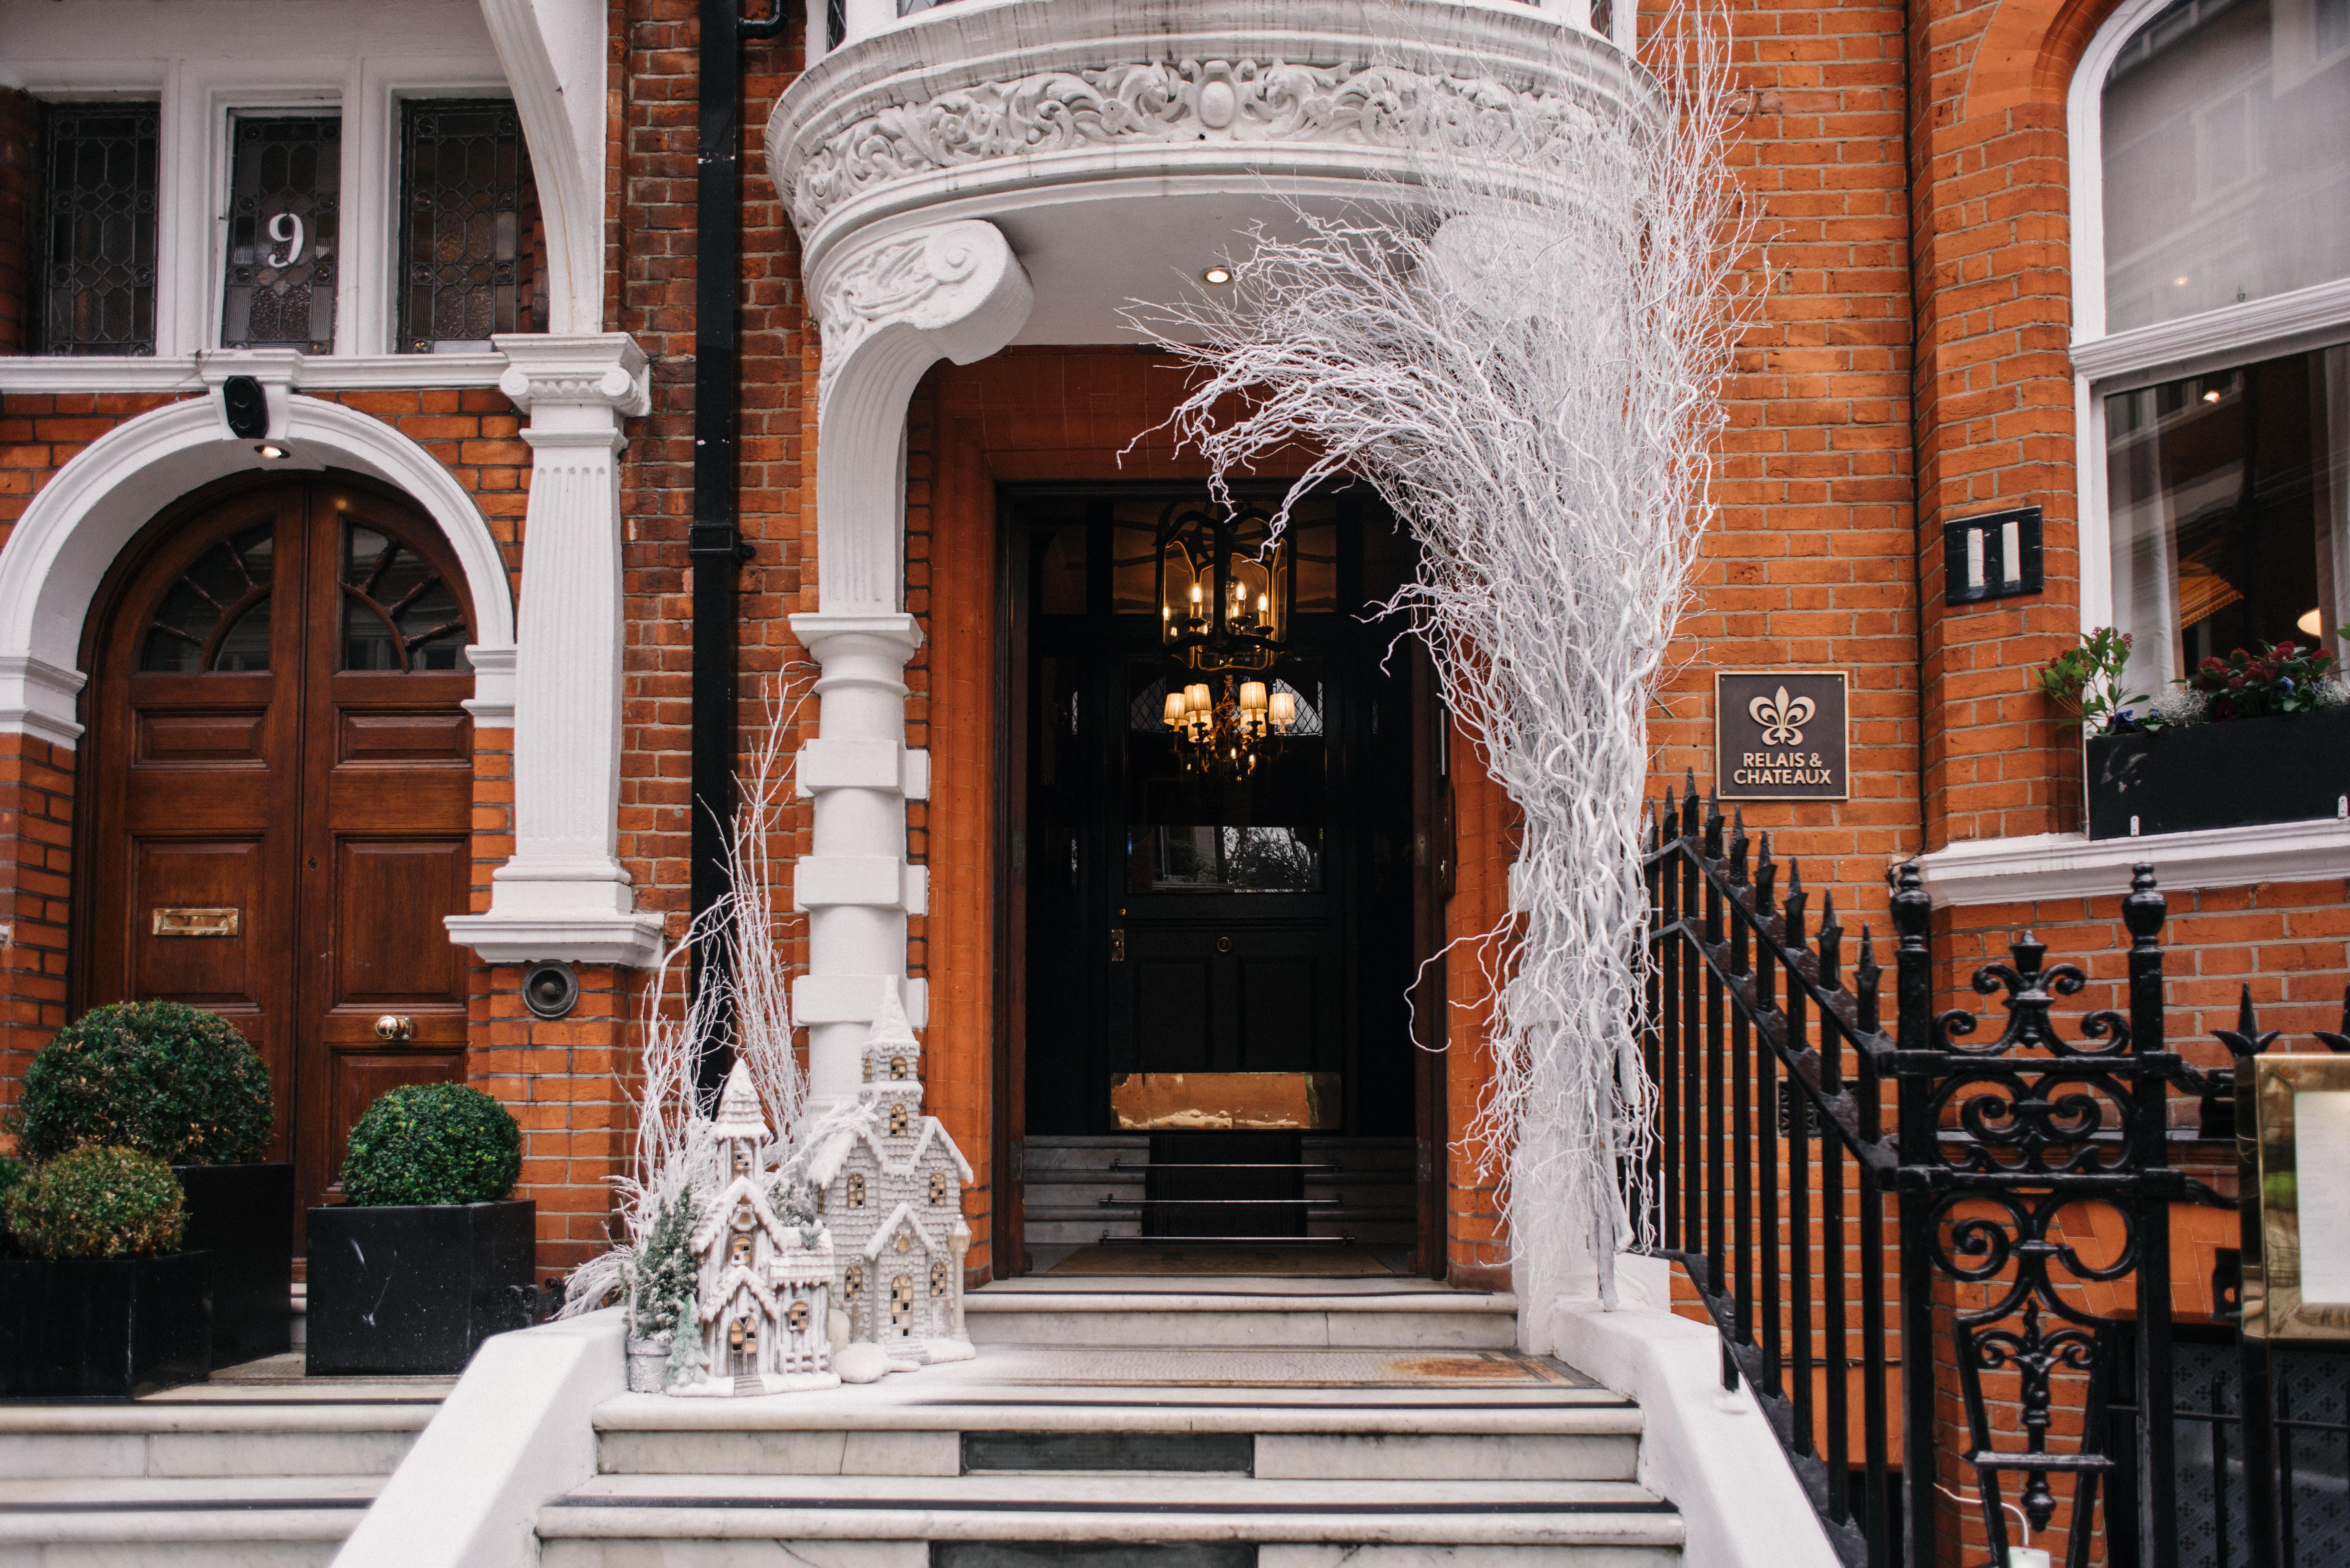 Win a Two-Night Stay at The Cadogan, A Belmond Hotel